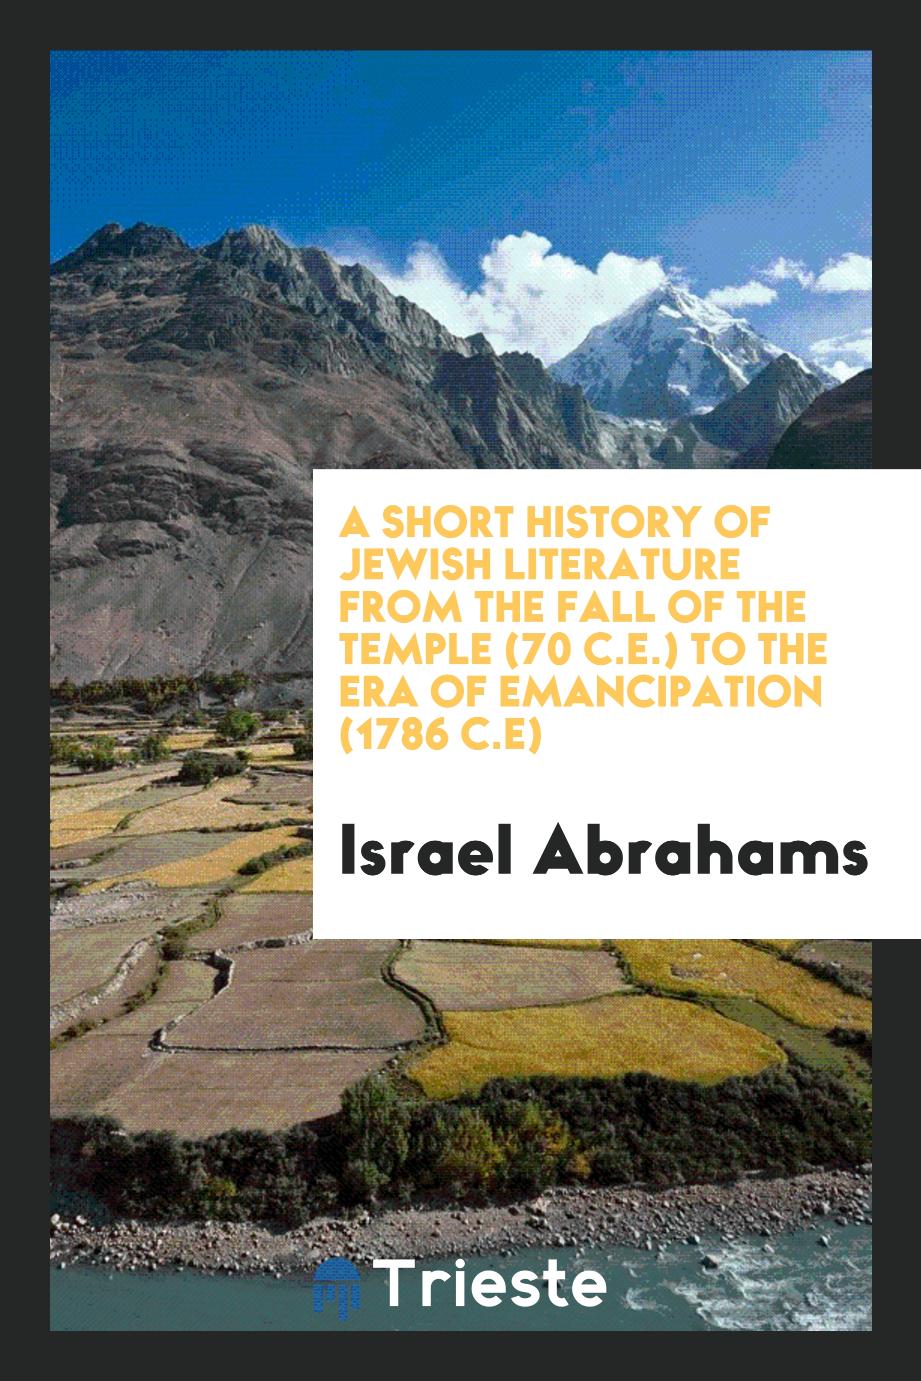 A short history of Jewish literature from the fall of the temple (70 C.E.) to the era of emancipation (1786 C.E)